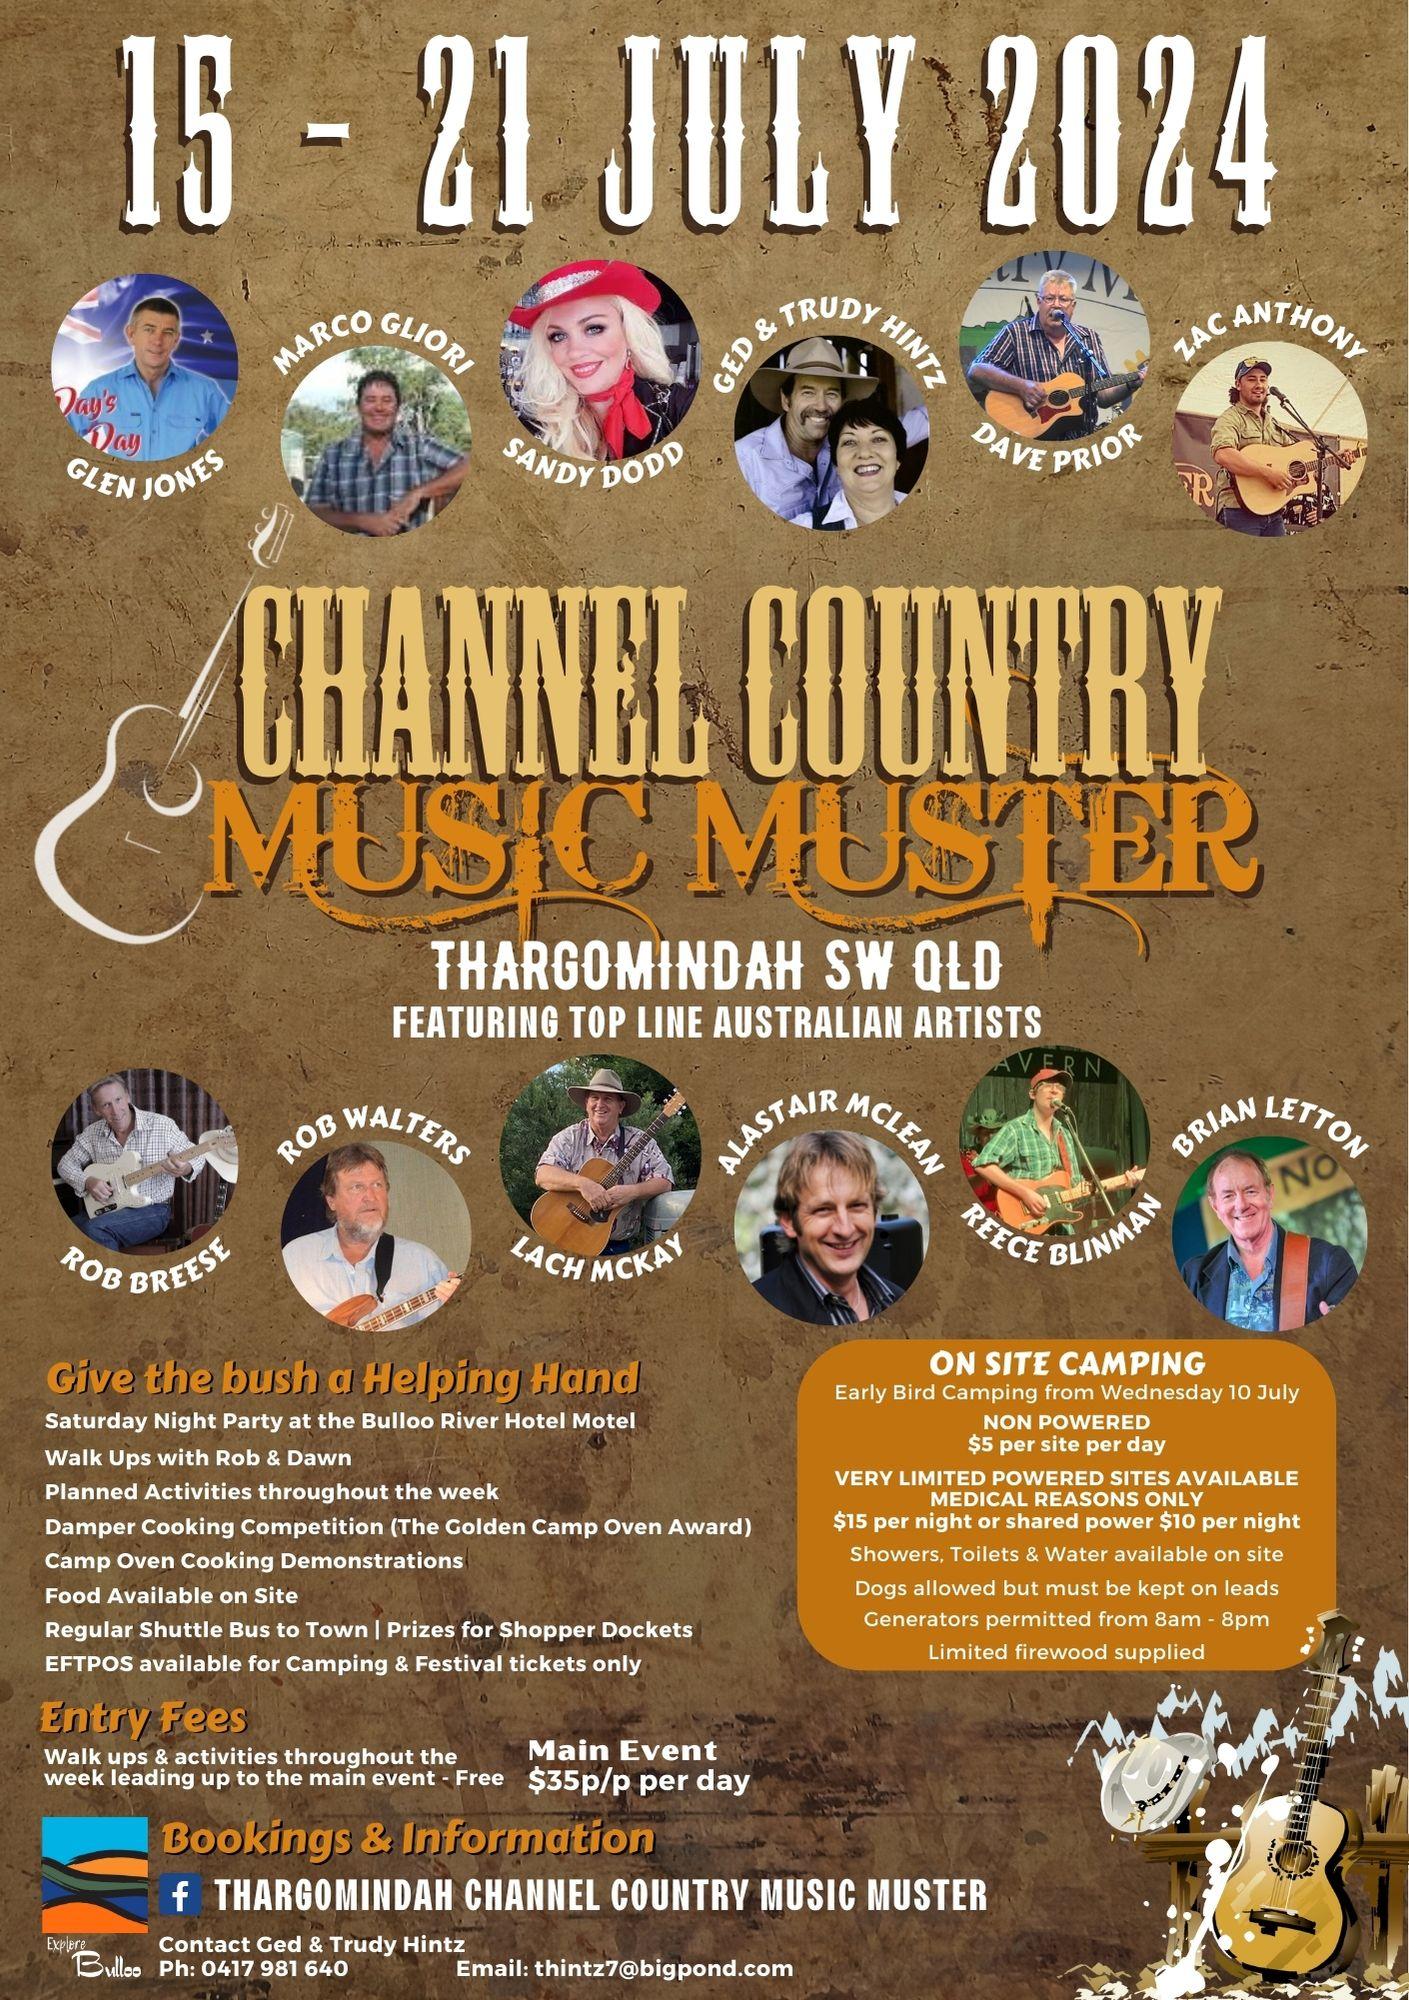 Come and listen to some of the best bush balladeers in Australia and immerse yourself in everything Country and Western on offer at the Thargomindah Rodeo Grounds.